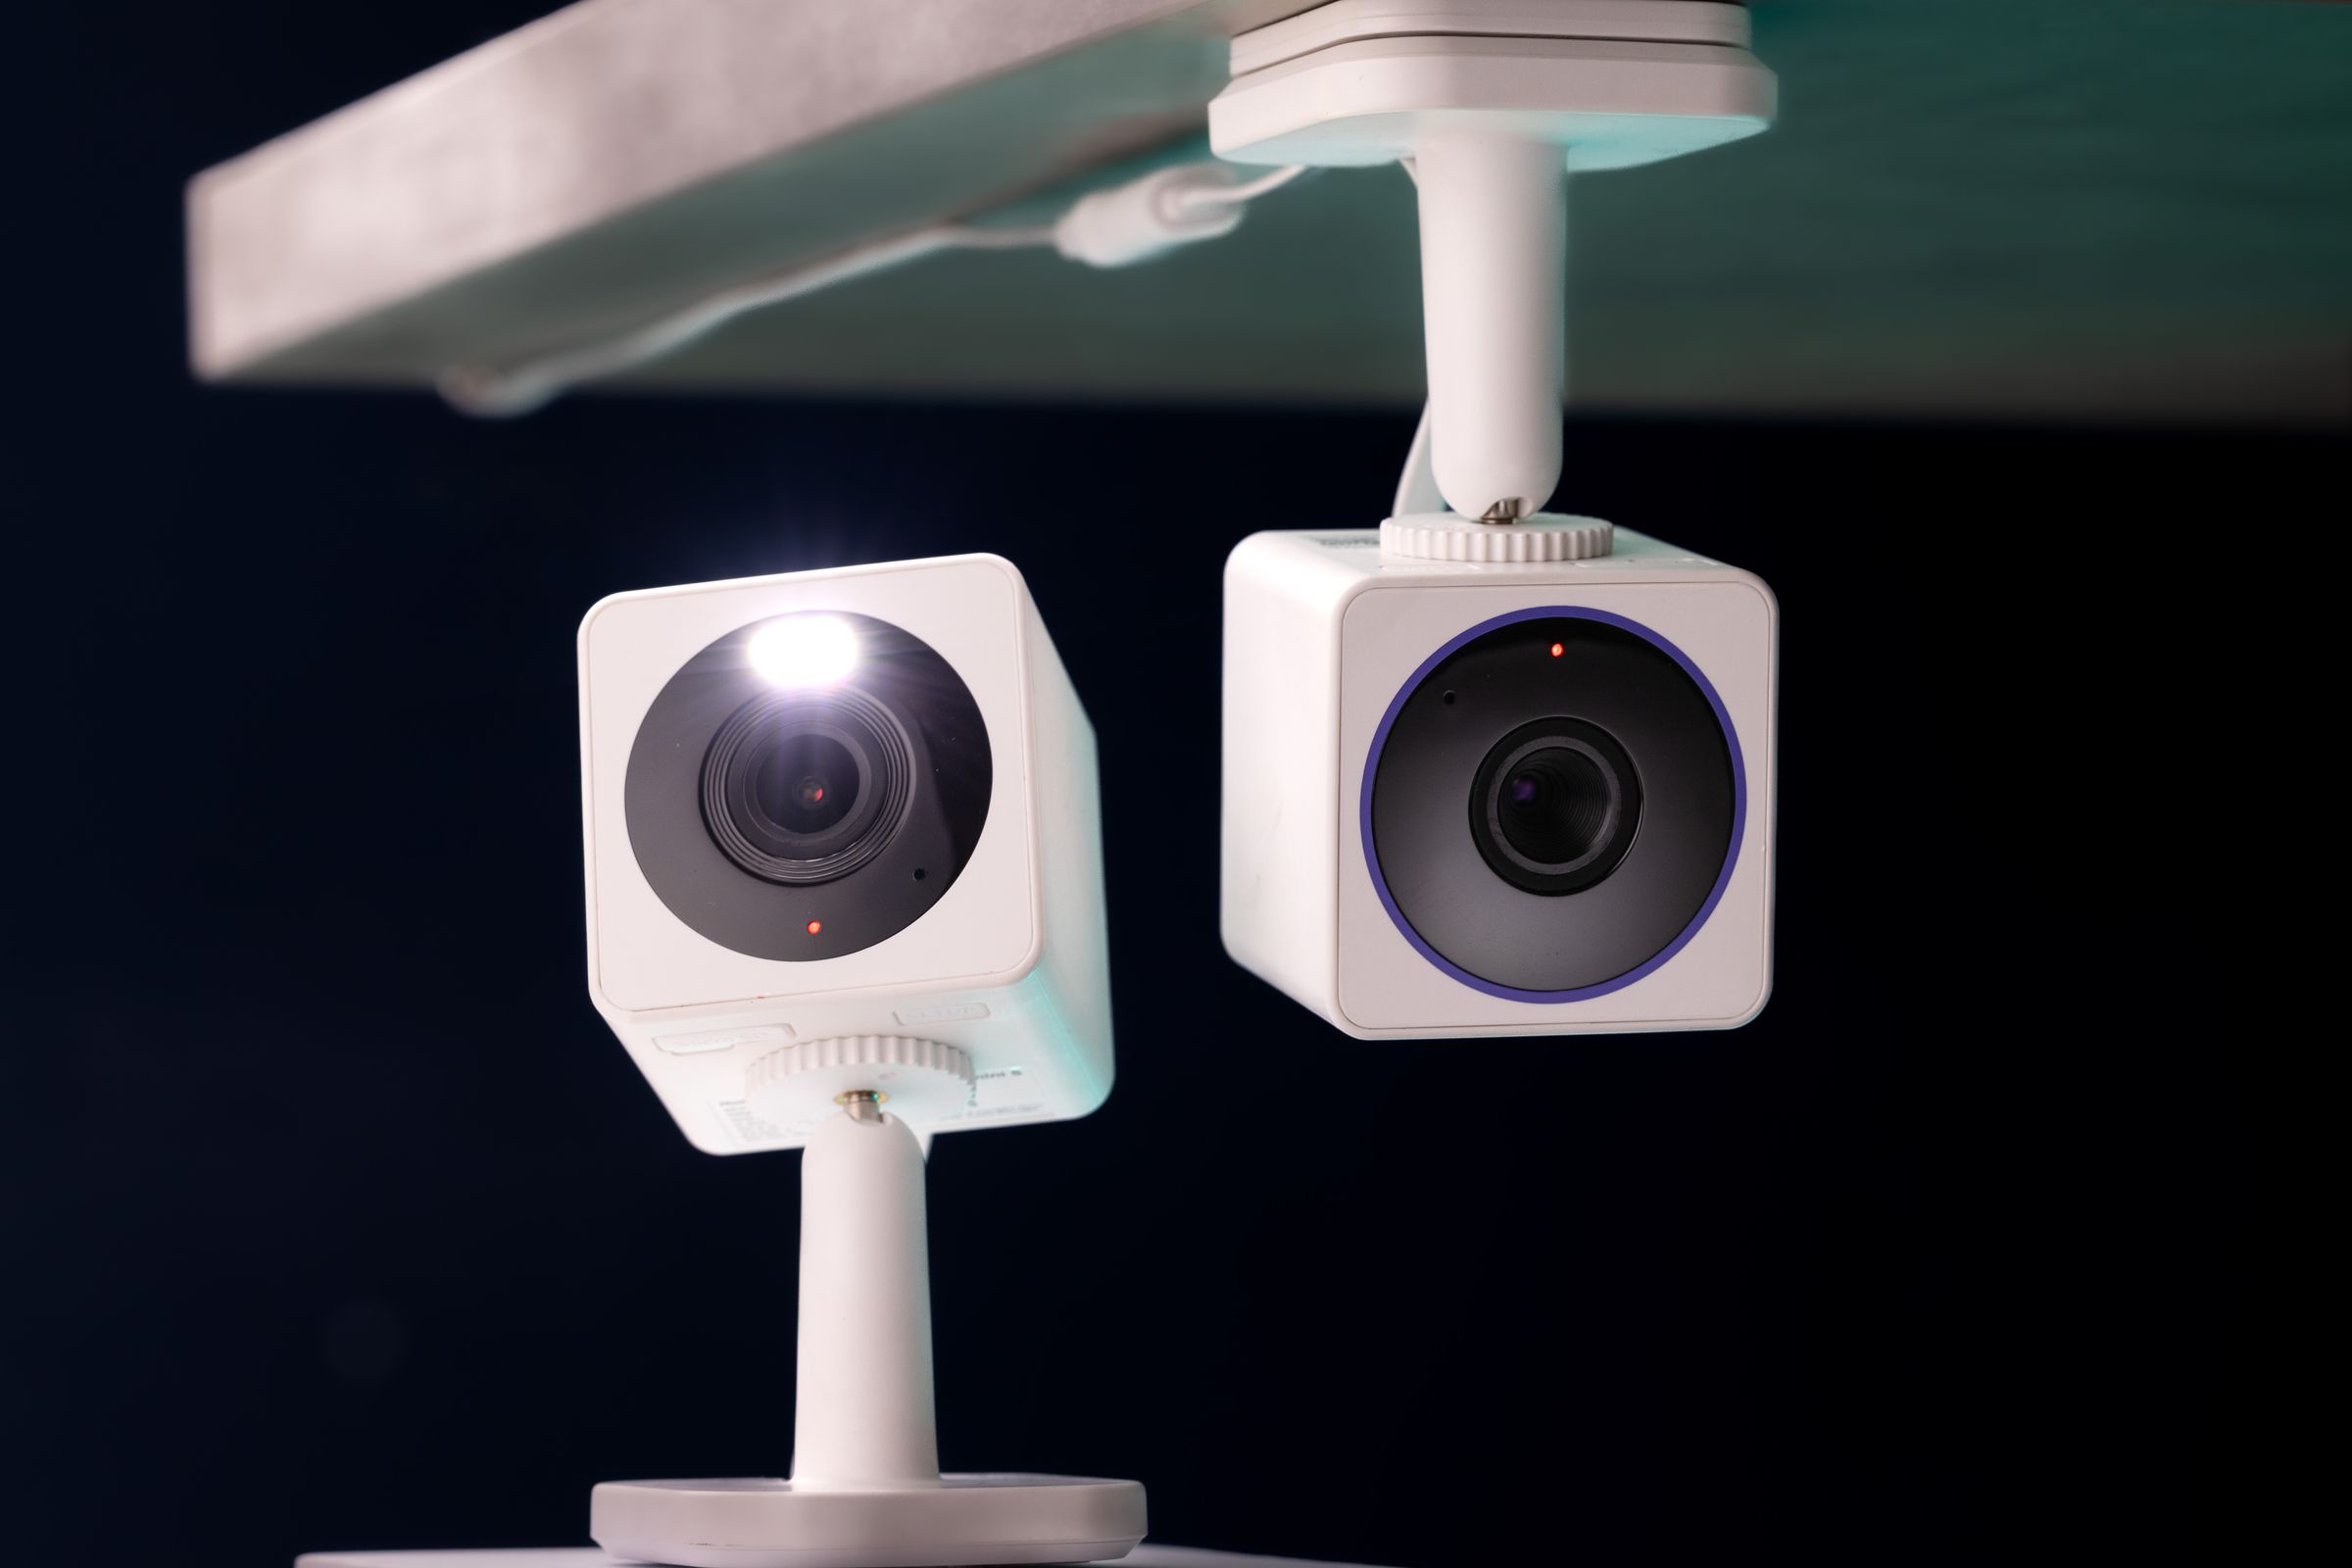 Wyze’s two new security cameras can be paired together for live multiview streaming